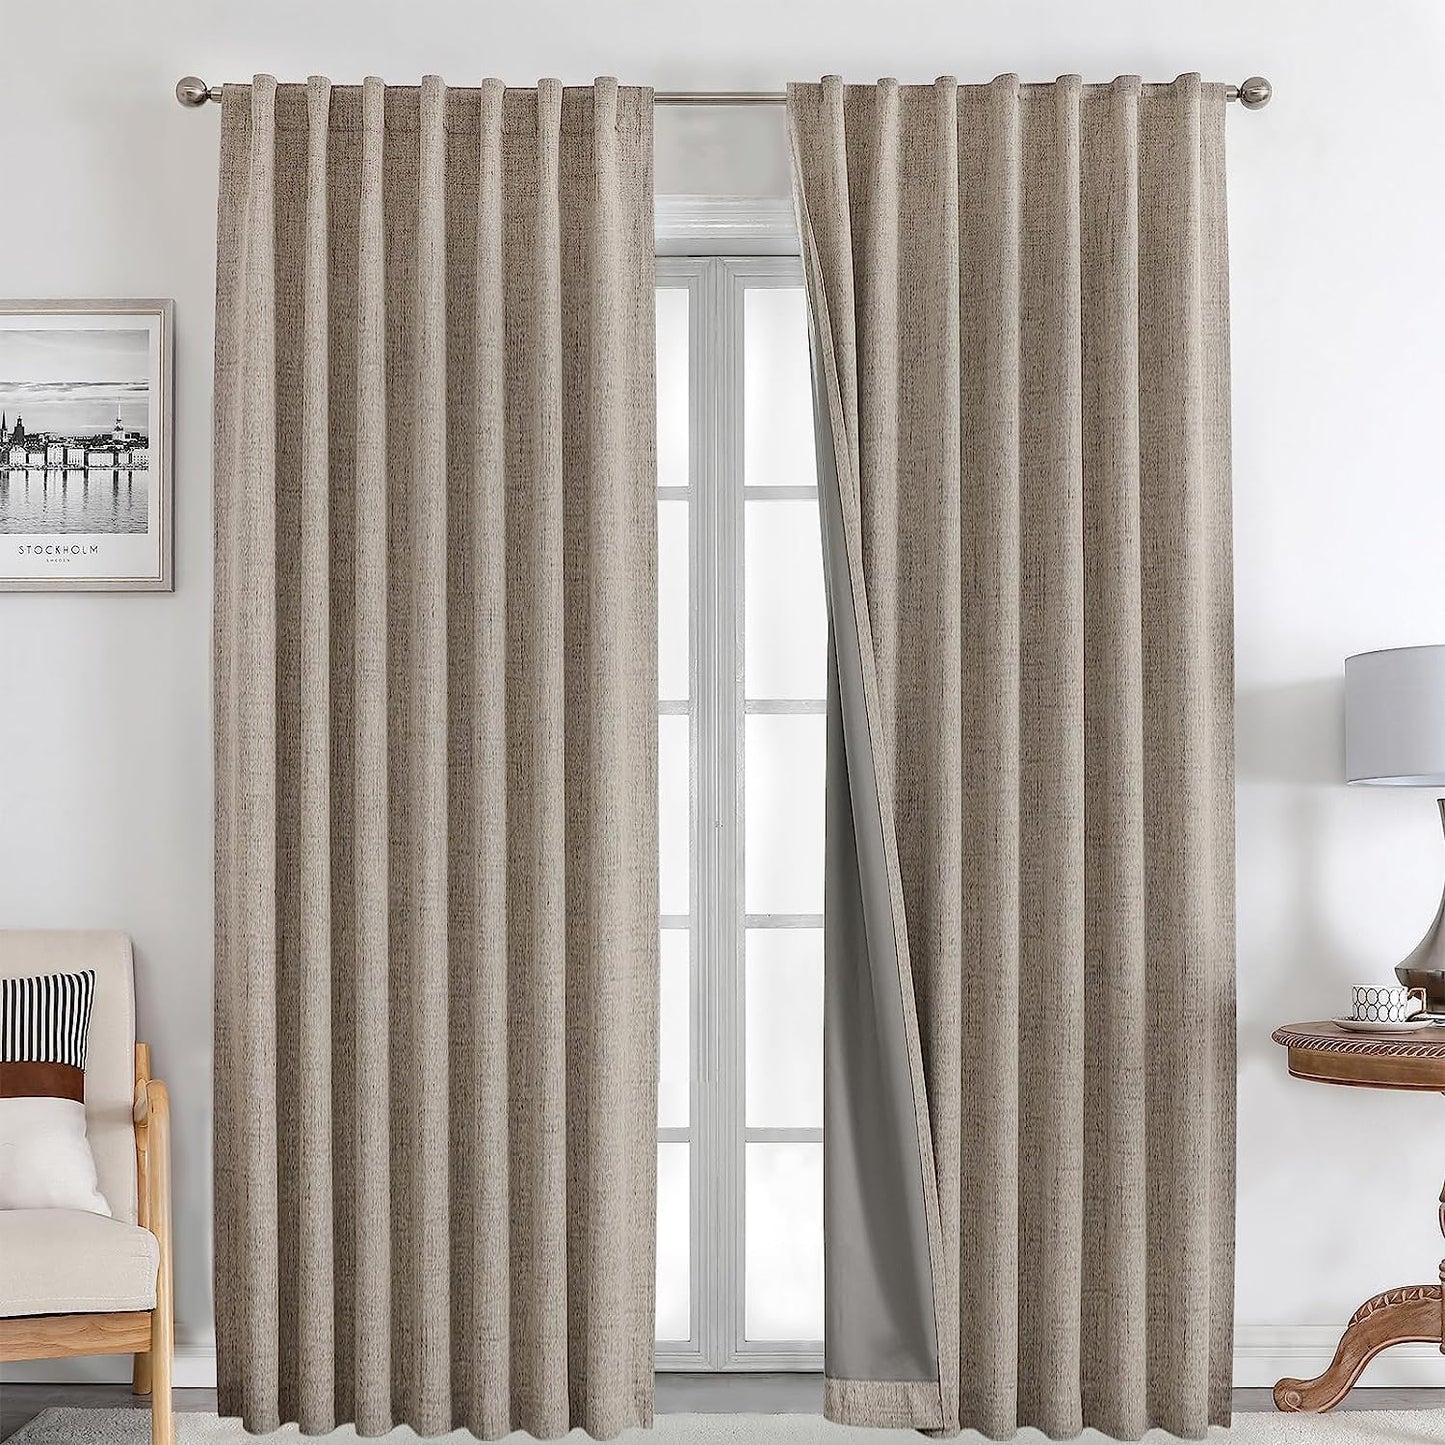 Joydeco 100% Black Out Curtains 96 Inch Long 1 Panels Burg Natural Blackout Linen Drapes for Bedroom Living Room Darkening Curtain Thermal Insulated Back Tab Rod Pocket(70X96 Inch,Black)  Joydeco Line 37W X 108L Inch X 2 Panels 